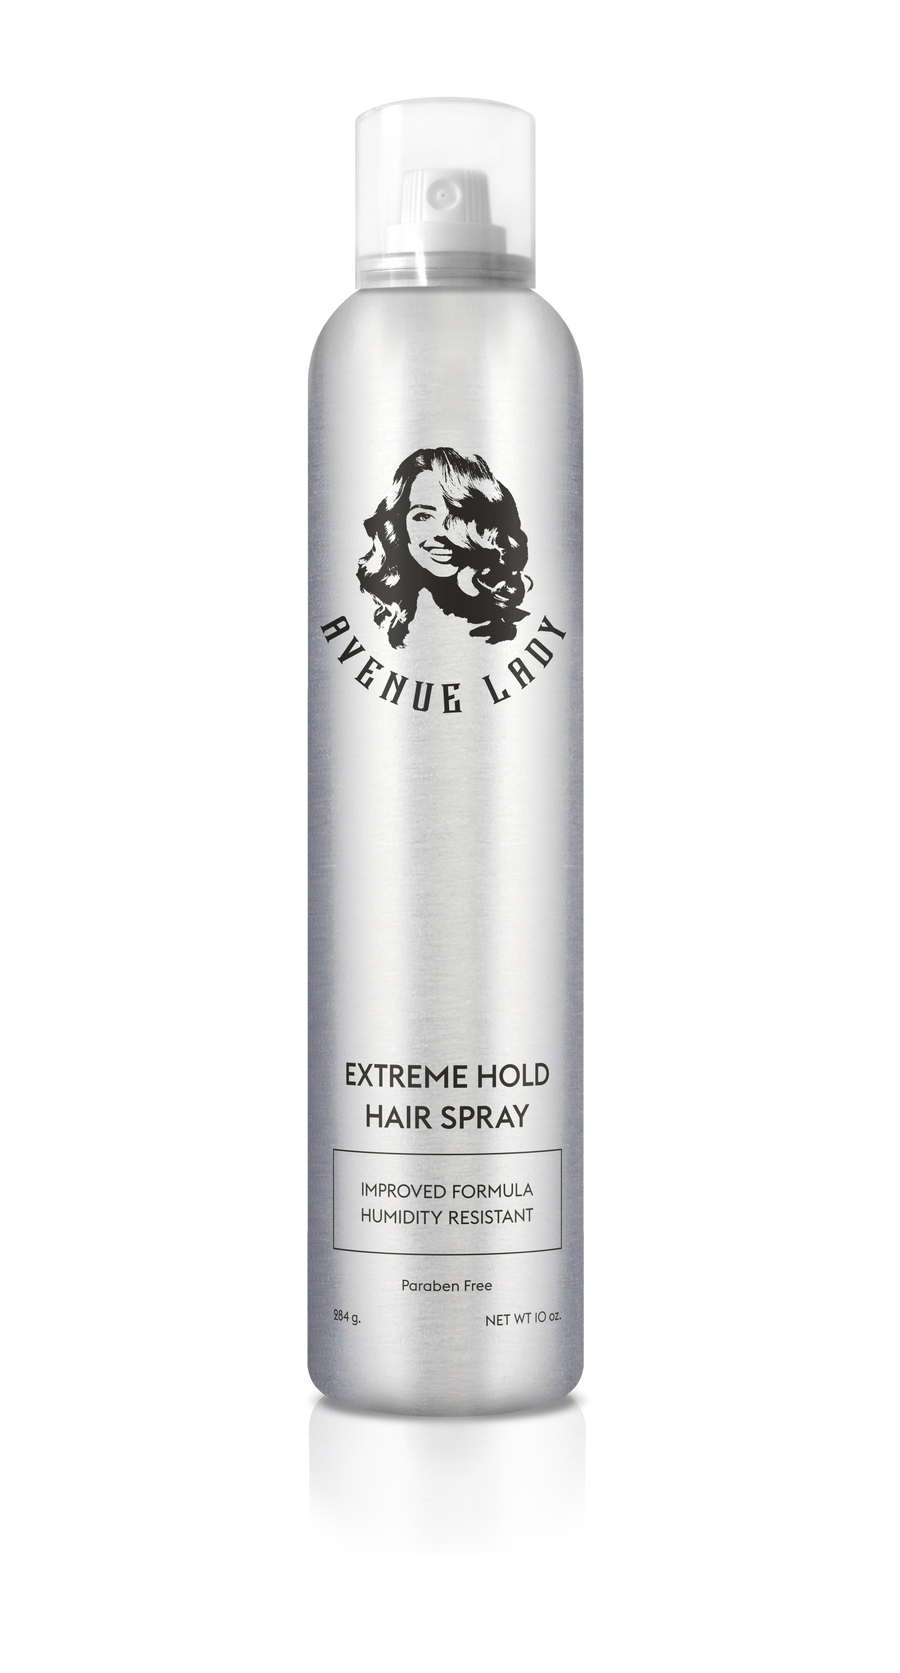 Extreme Hold Hair Spray For Women (10 oz) - Avenue Man Hair Products 